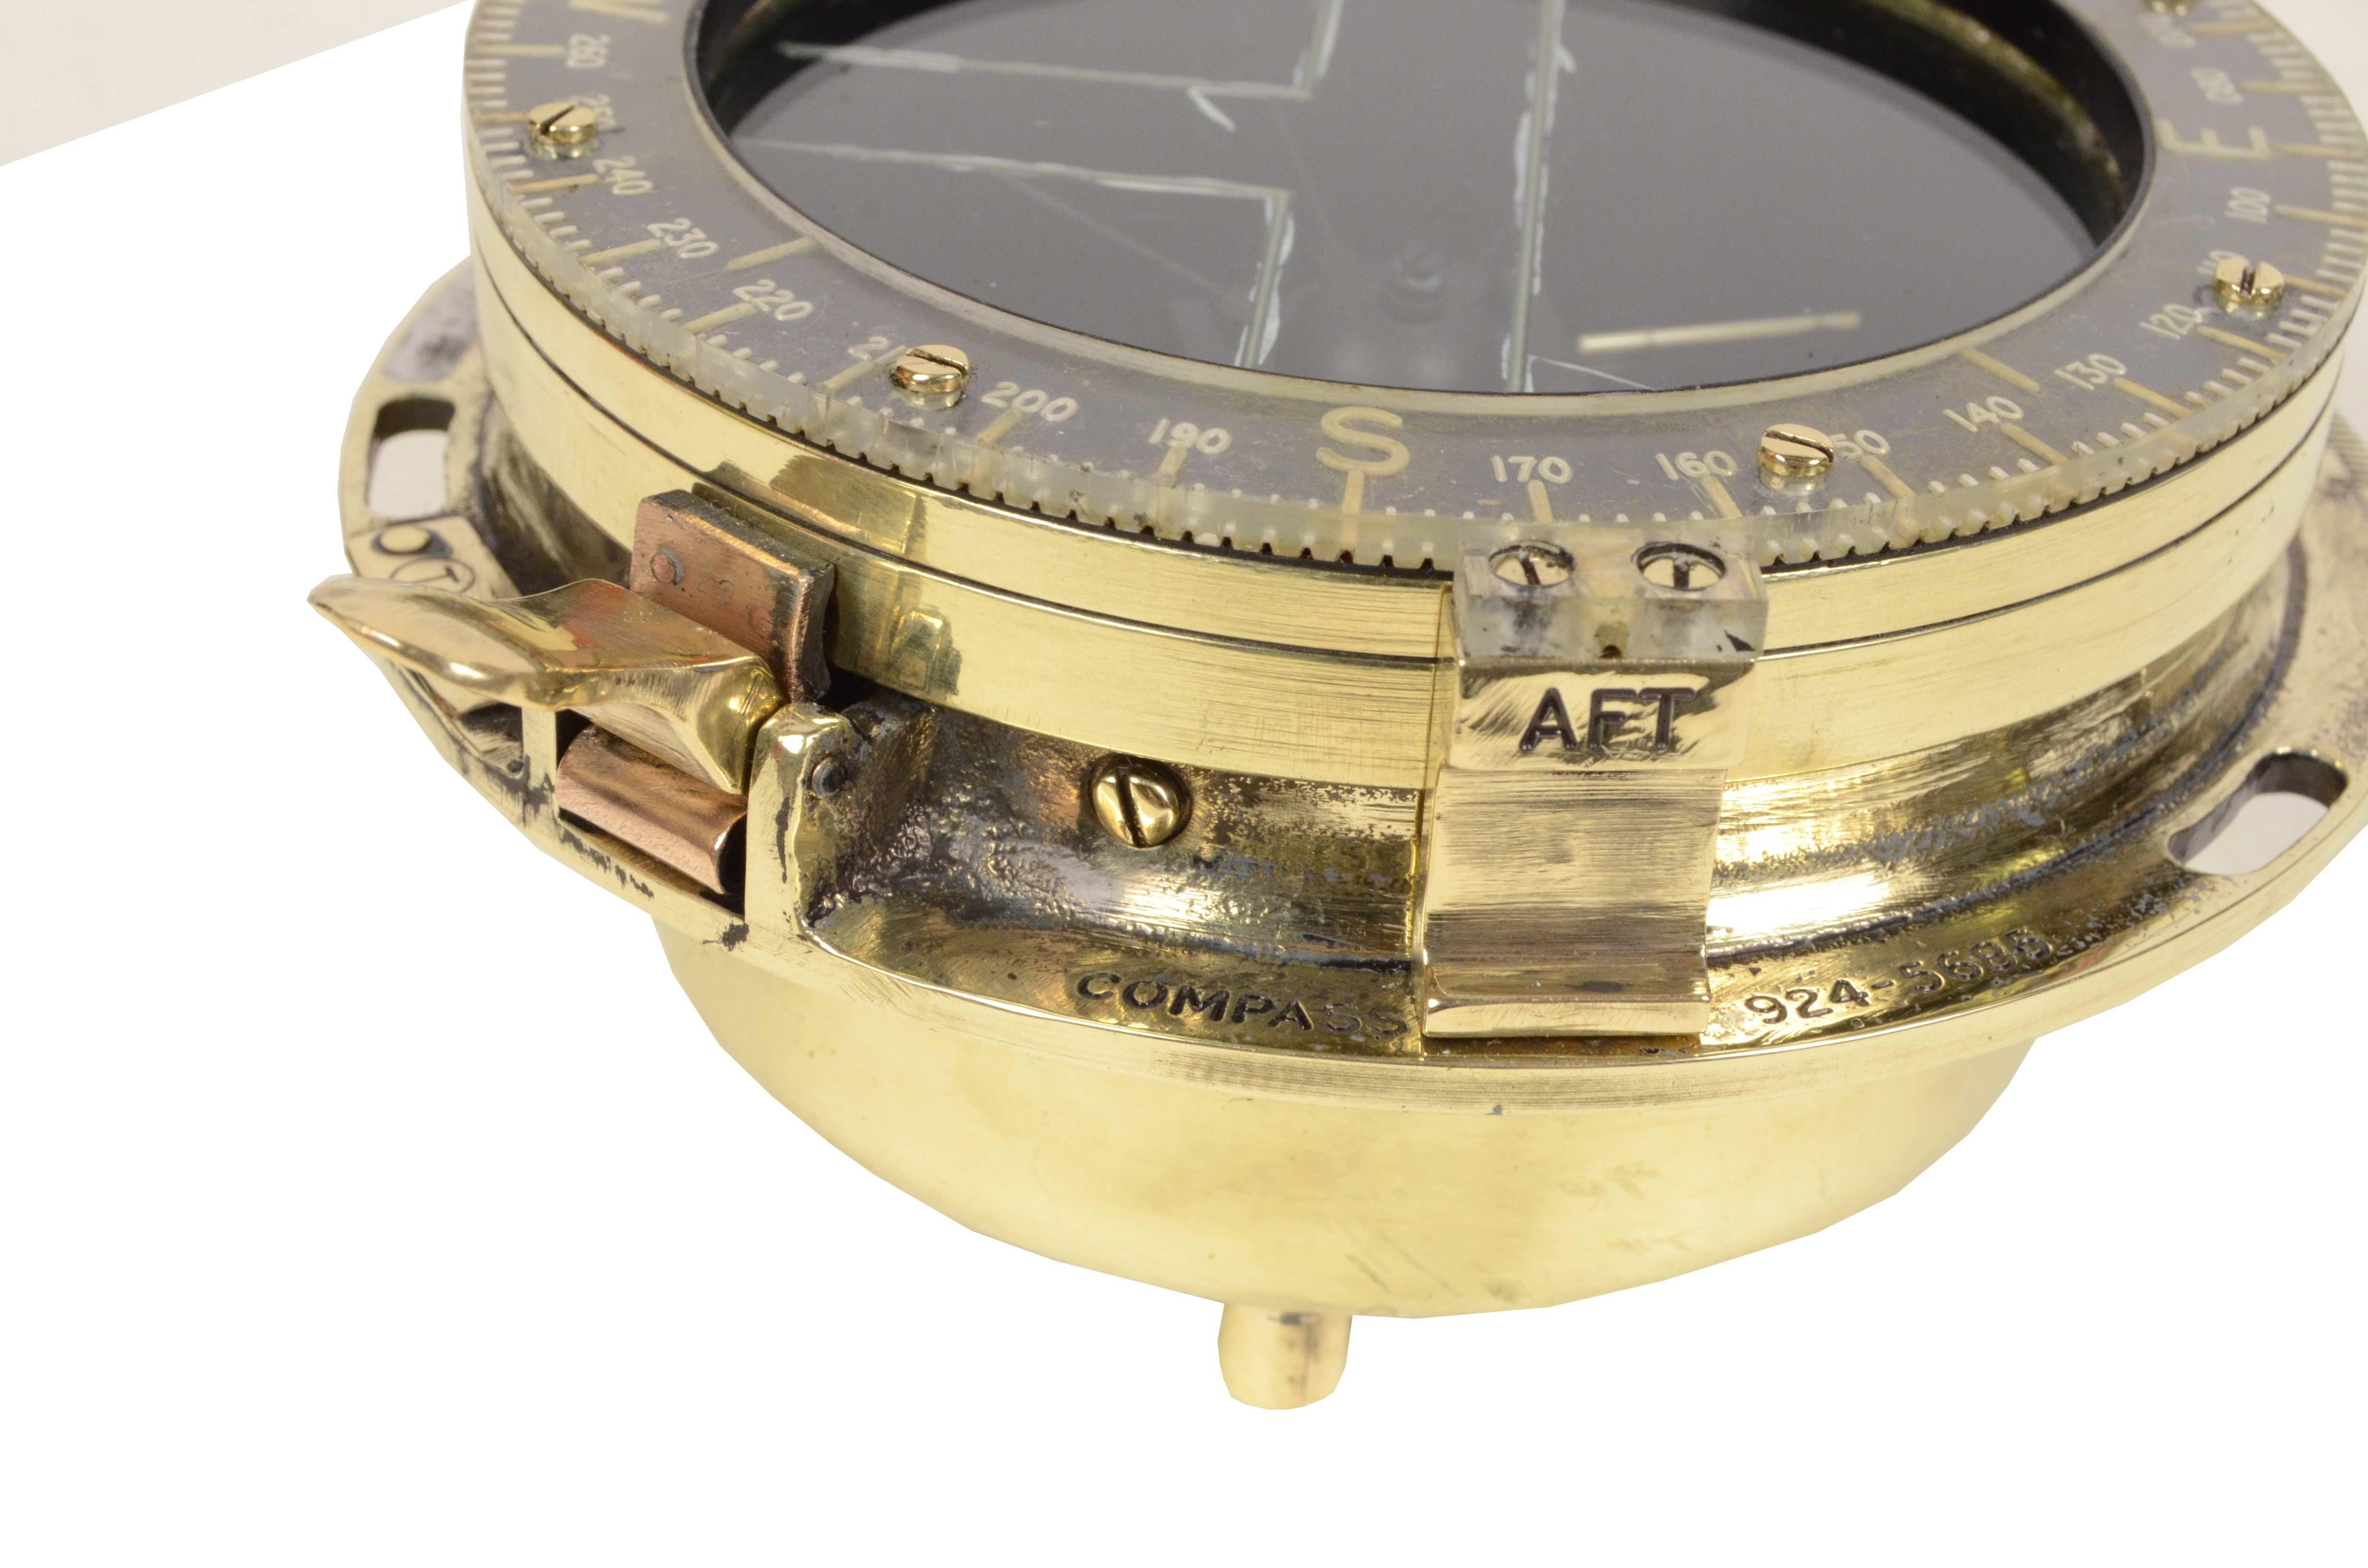 1935s Brass Aviation Compass Used forBoeing B-17 Flyin Fortress American Bomber  3